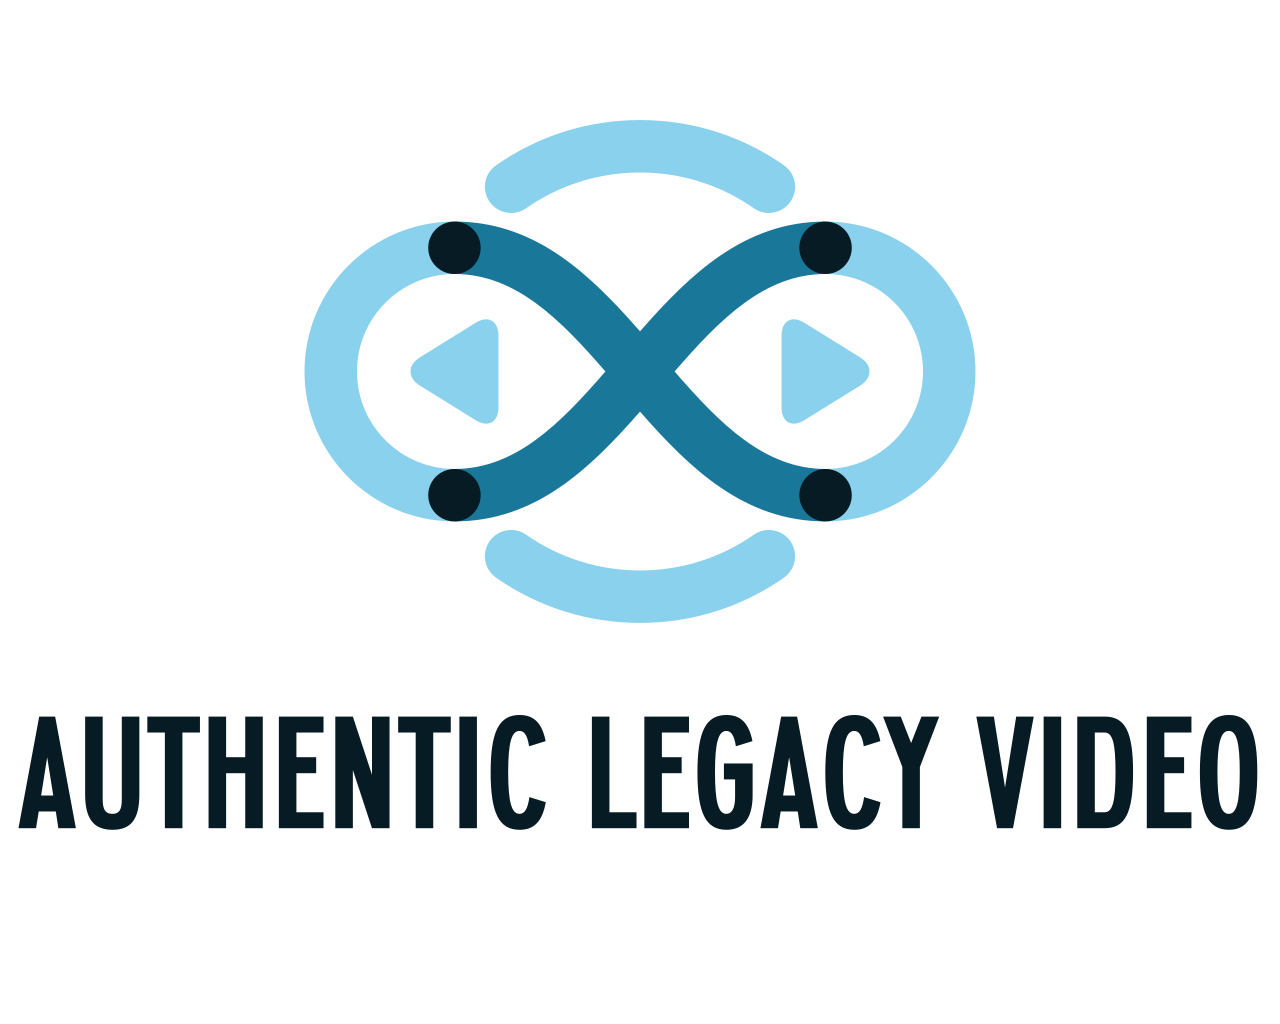 Authentic Legacy Video